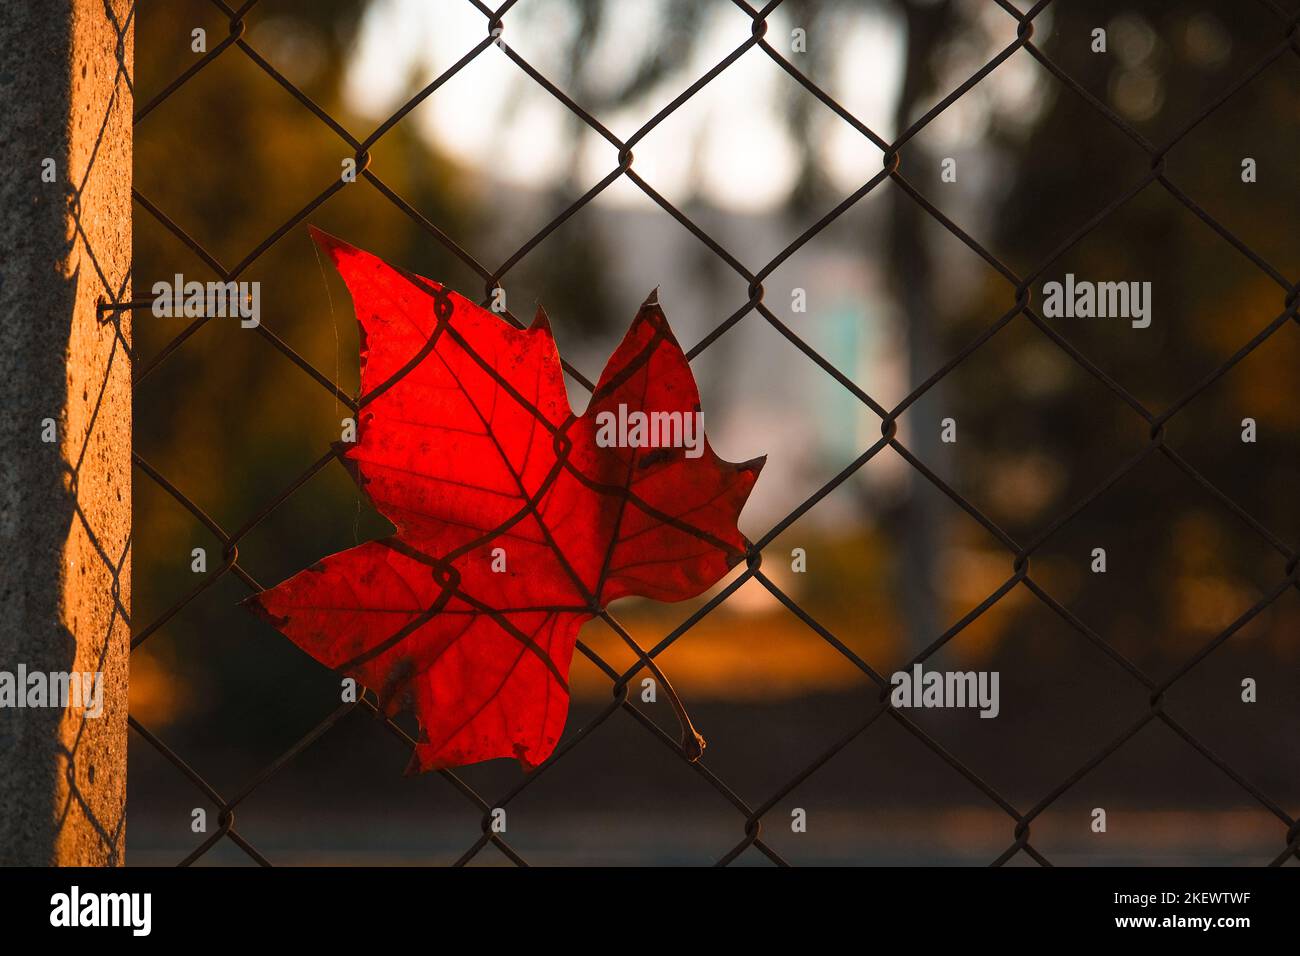 Red autumn maple leaf on metal mesh in sunlight. Stock Photo